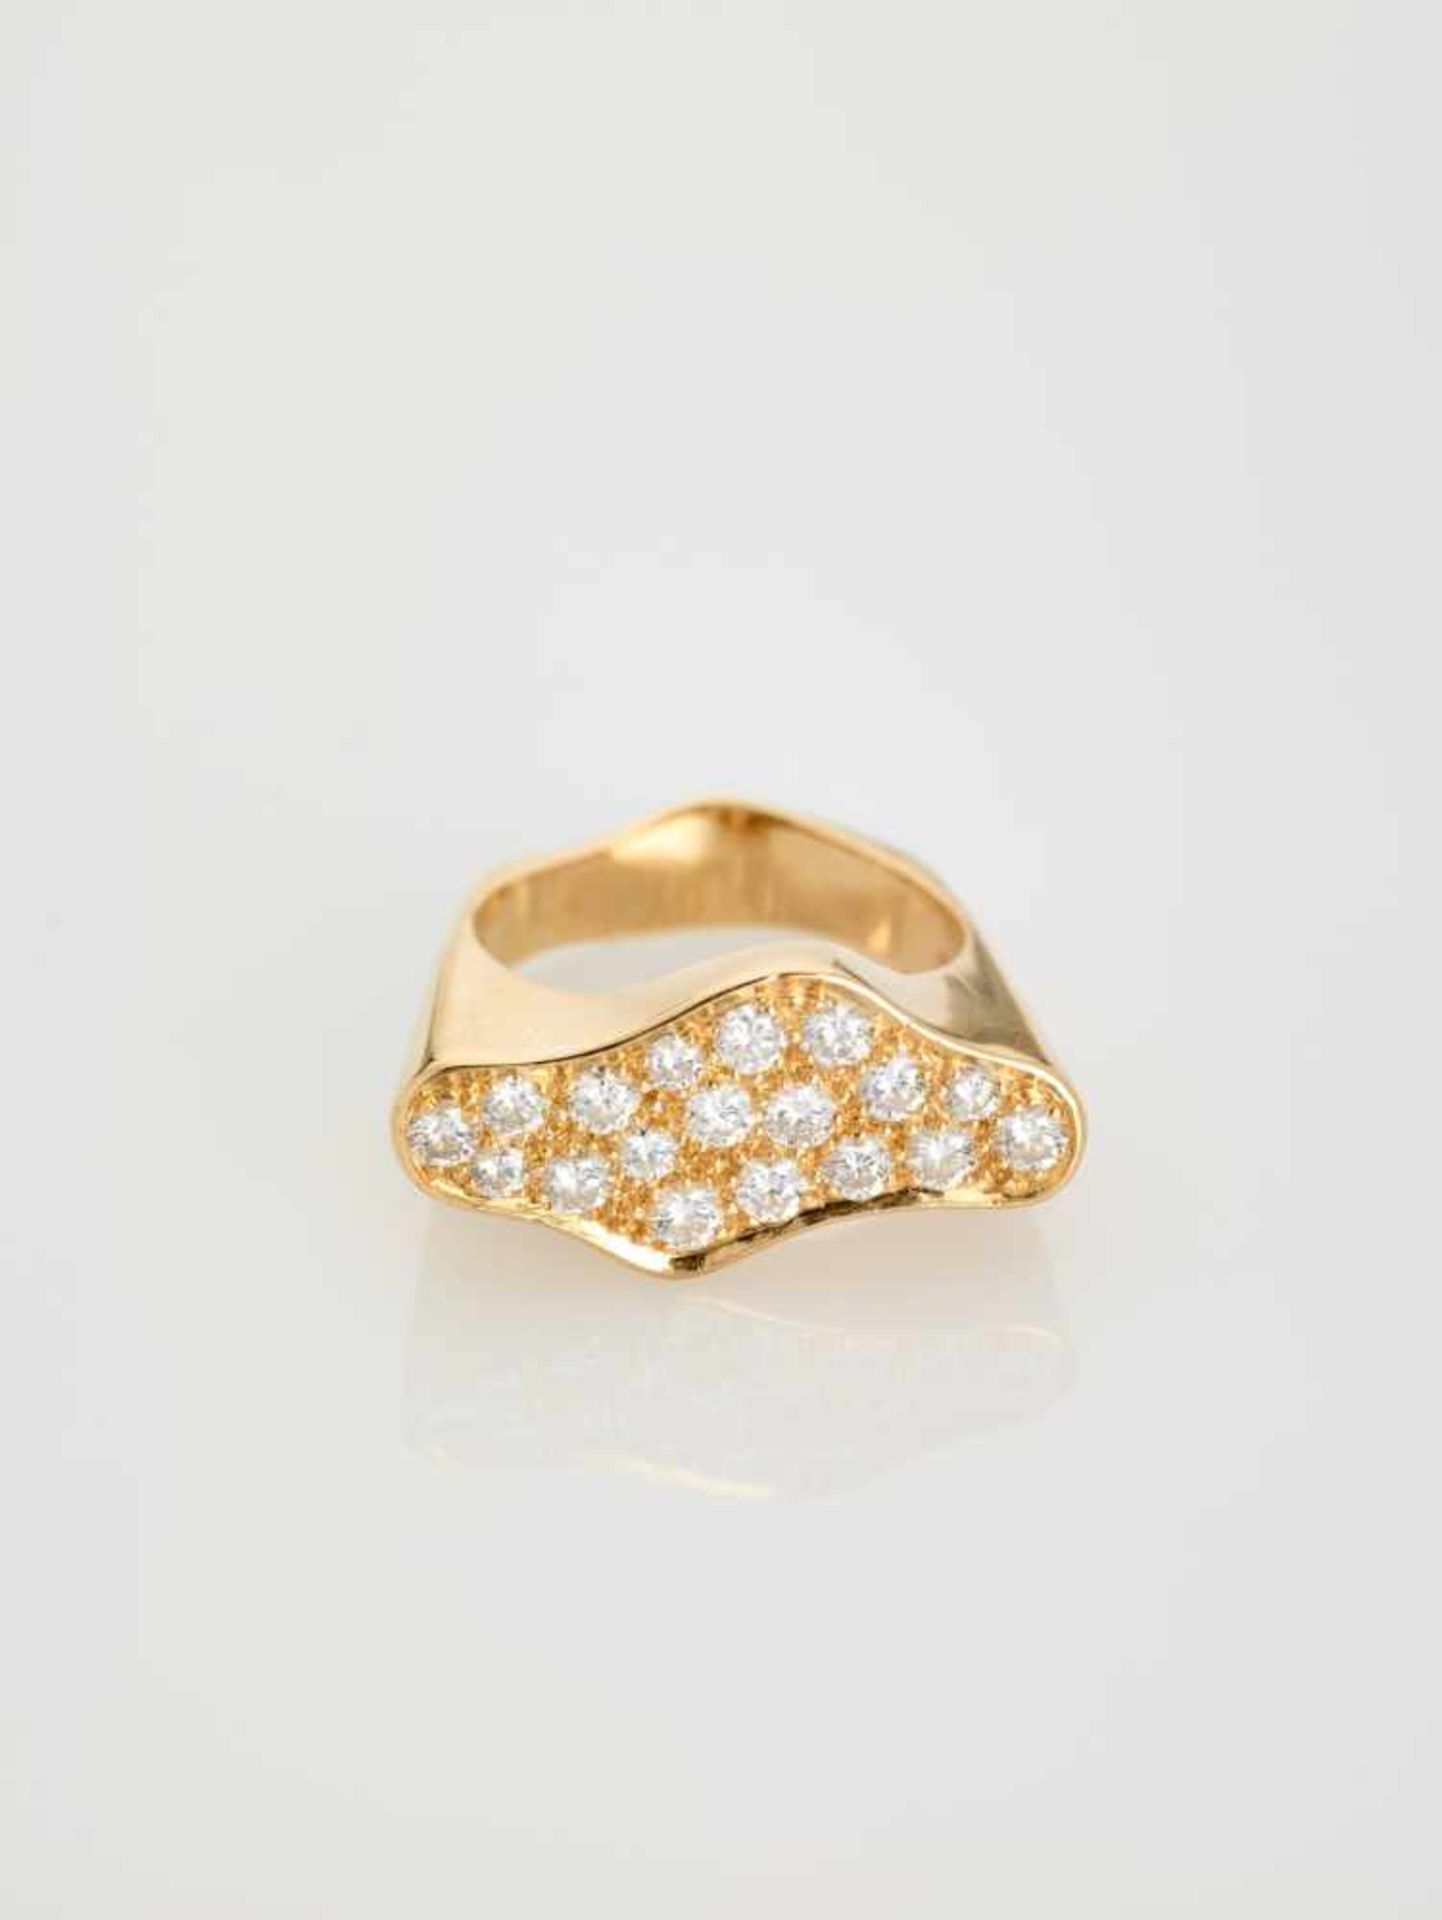 A 1970s 18 CARAT YELLOW GOLD COCKTAIL RING WITH 18 DIAMONDSAustria1970s, hallmarked ‘750’ and with a - Image 2 of 6